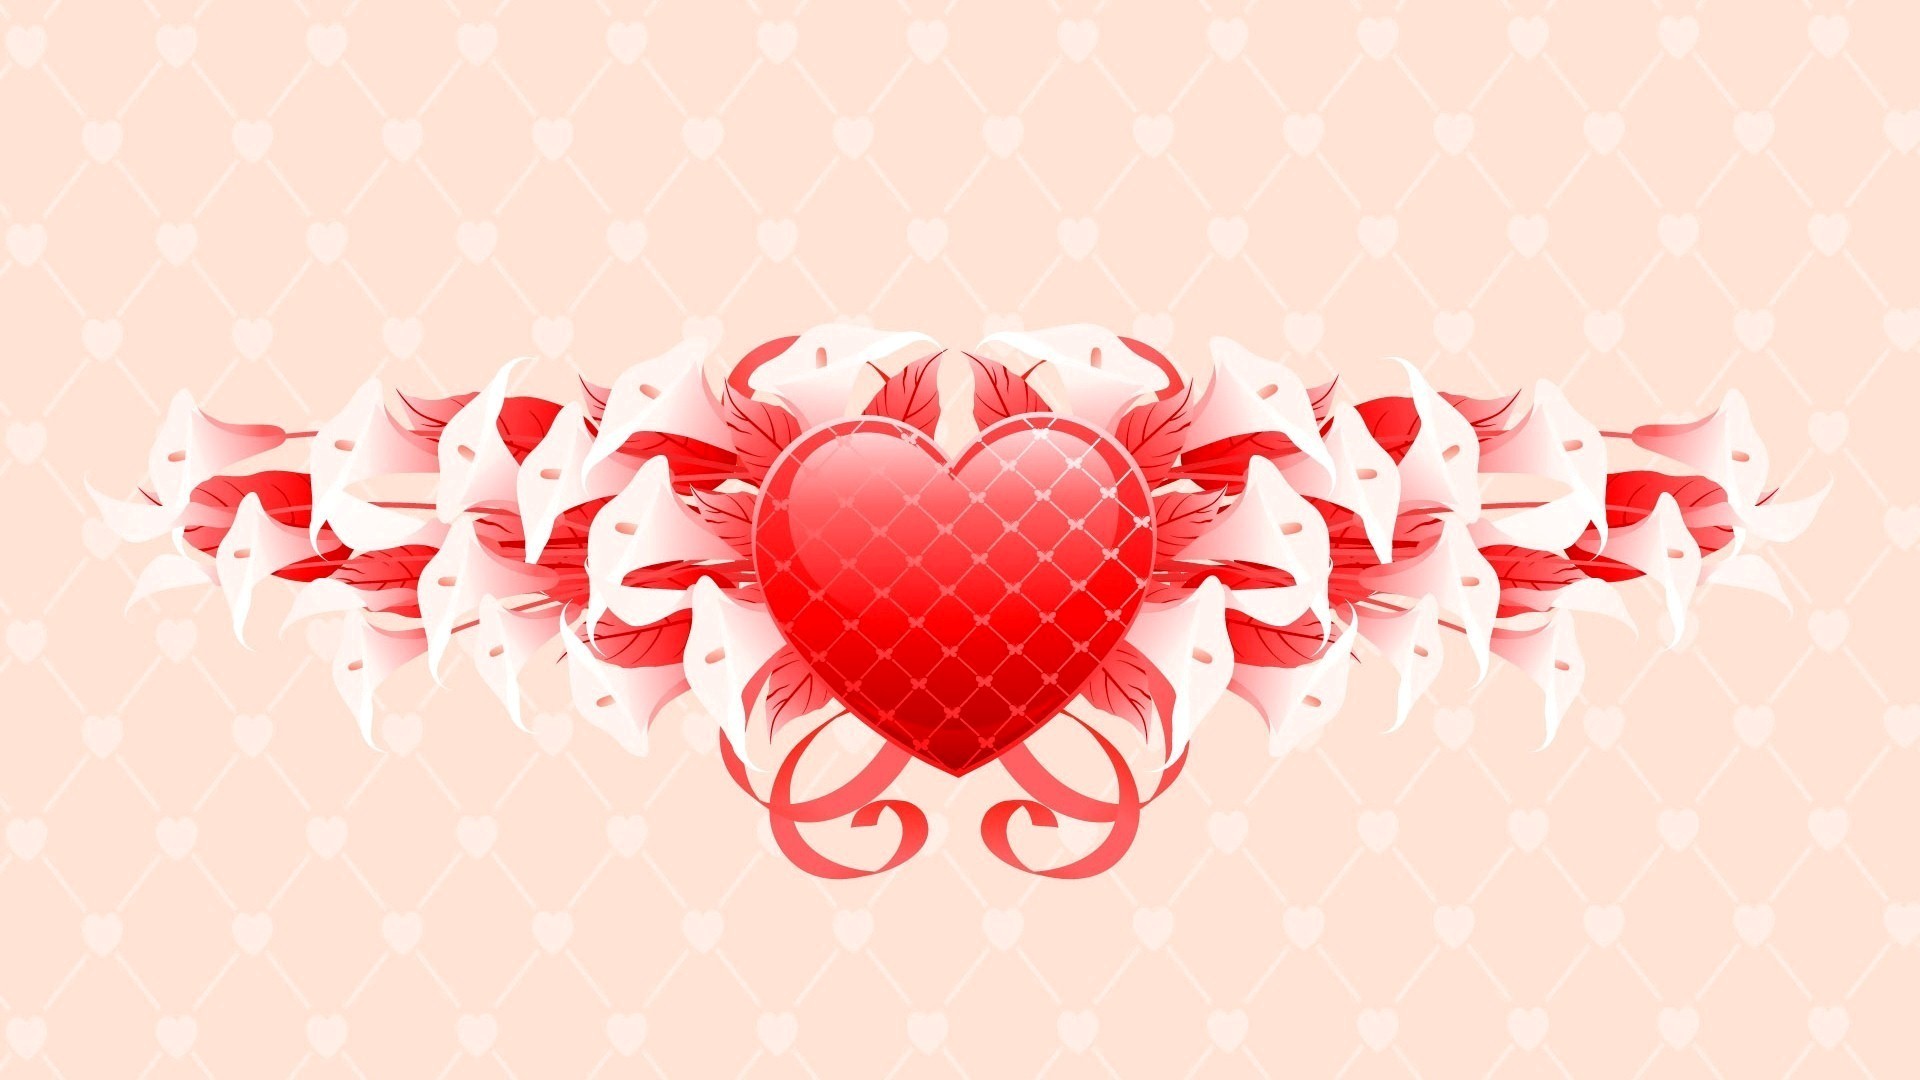 Full Size Of Coloring Page Delightful Red Heart Wallpaper Cute 3d Hearts Hd Coloring Page 1920x1080